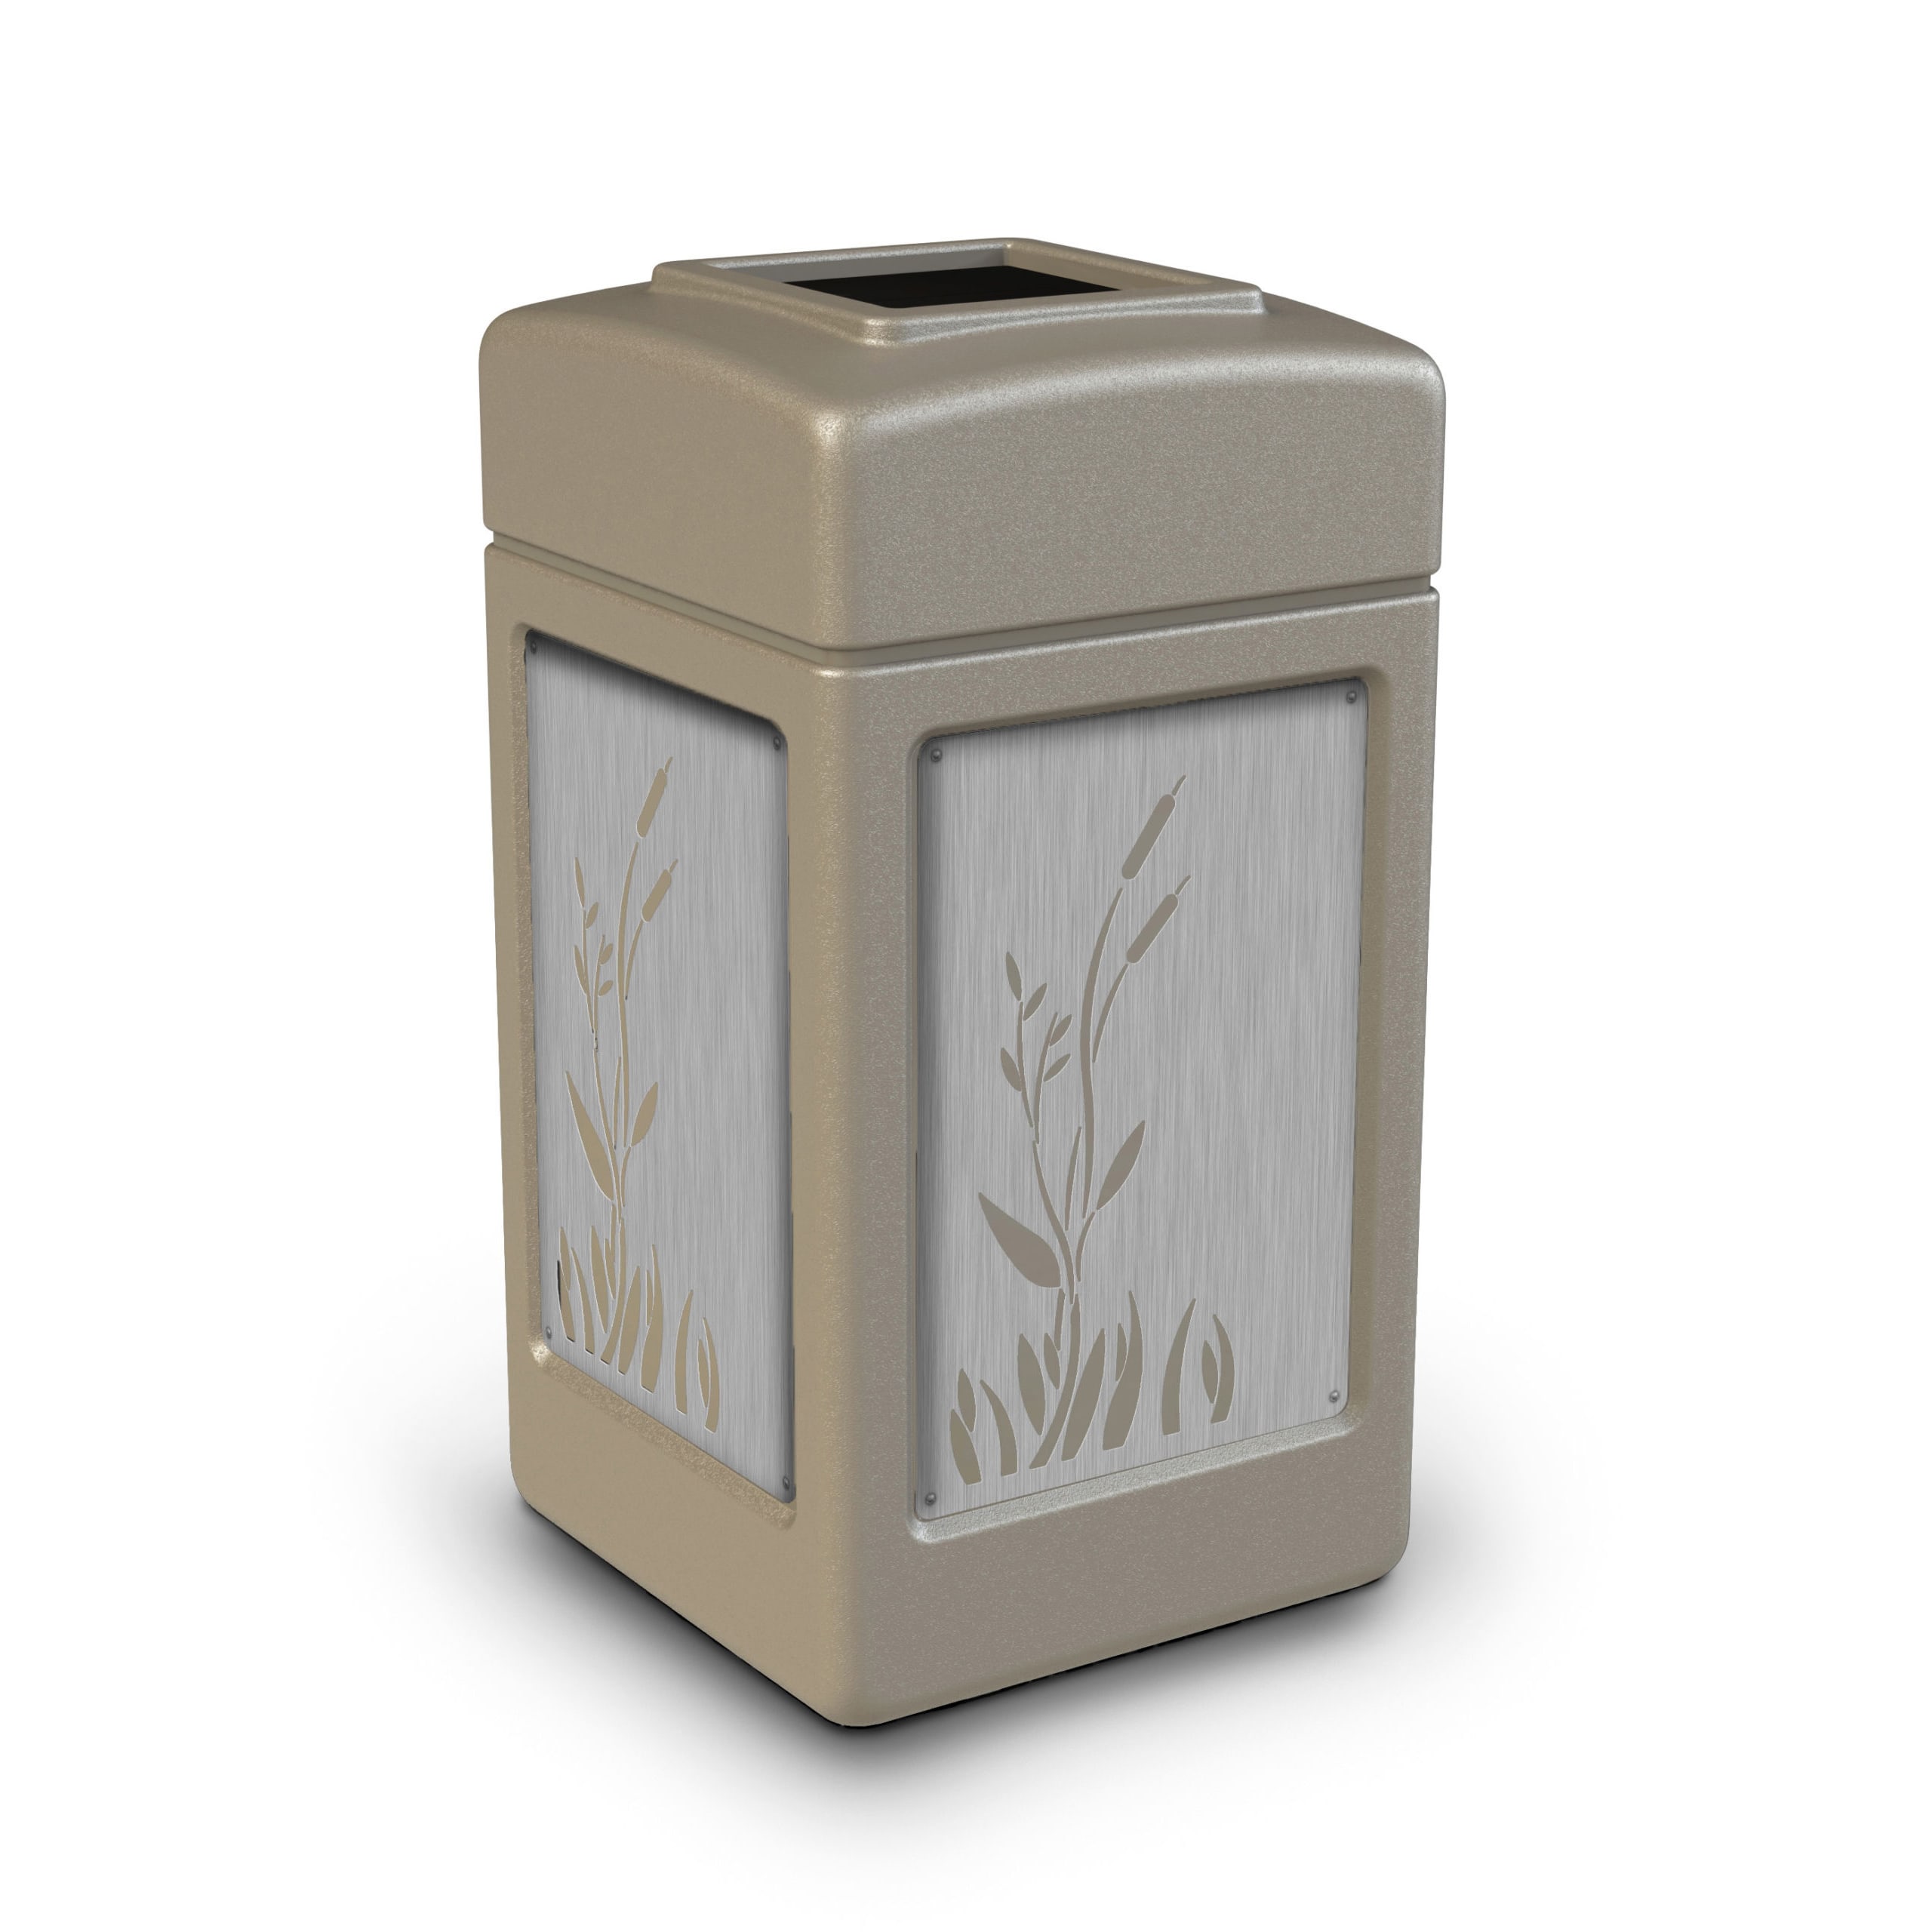 https://www.commercialzone.com/wp-content/uploads/2022/09/733963K-PolyTec-Series-42-Gallon-Square-Waste-Receptacle-Beige-Cattails-scaled-1.jpg